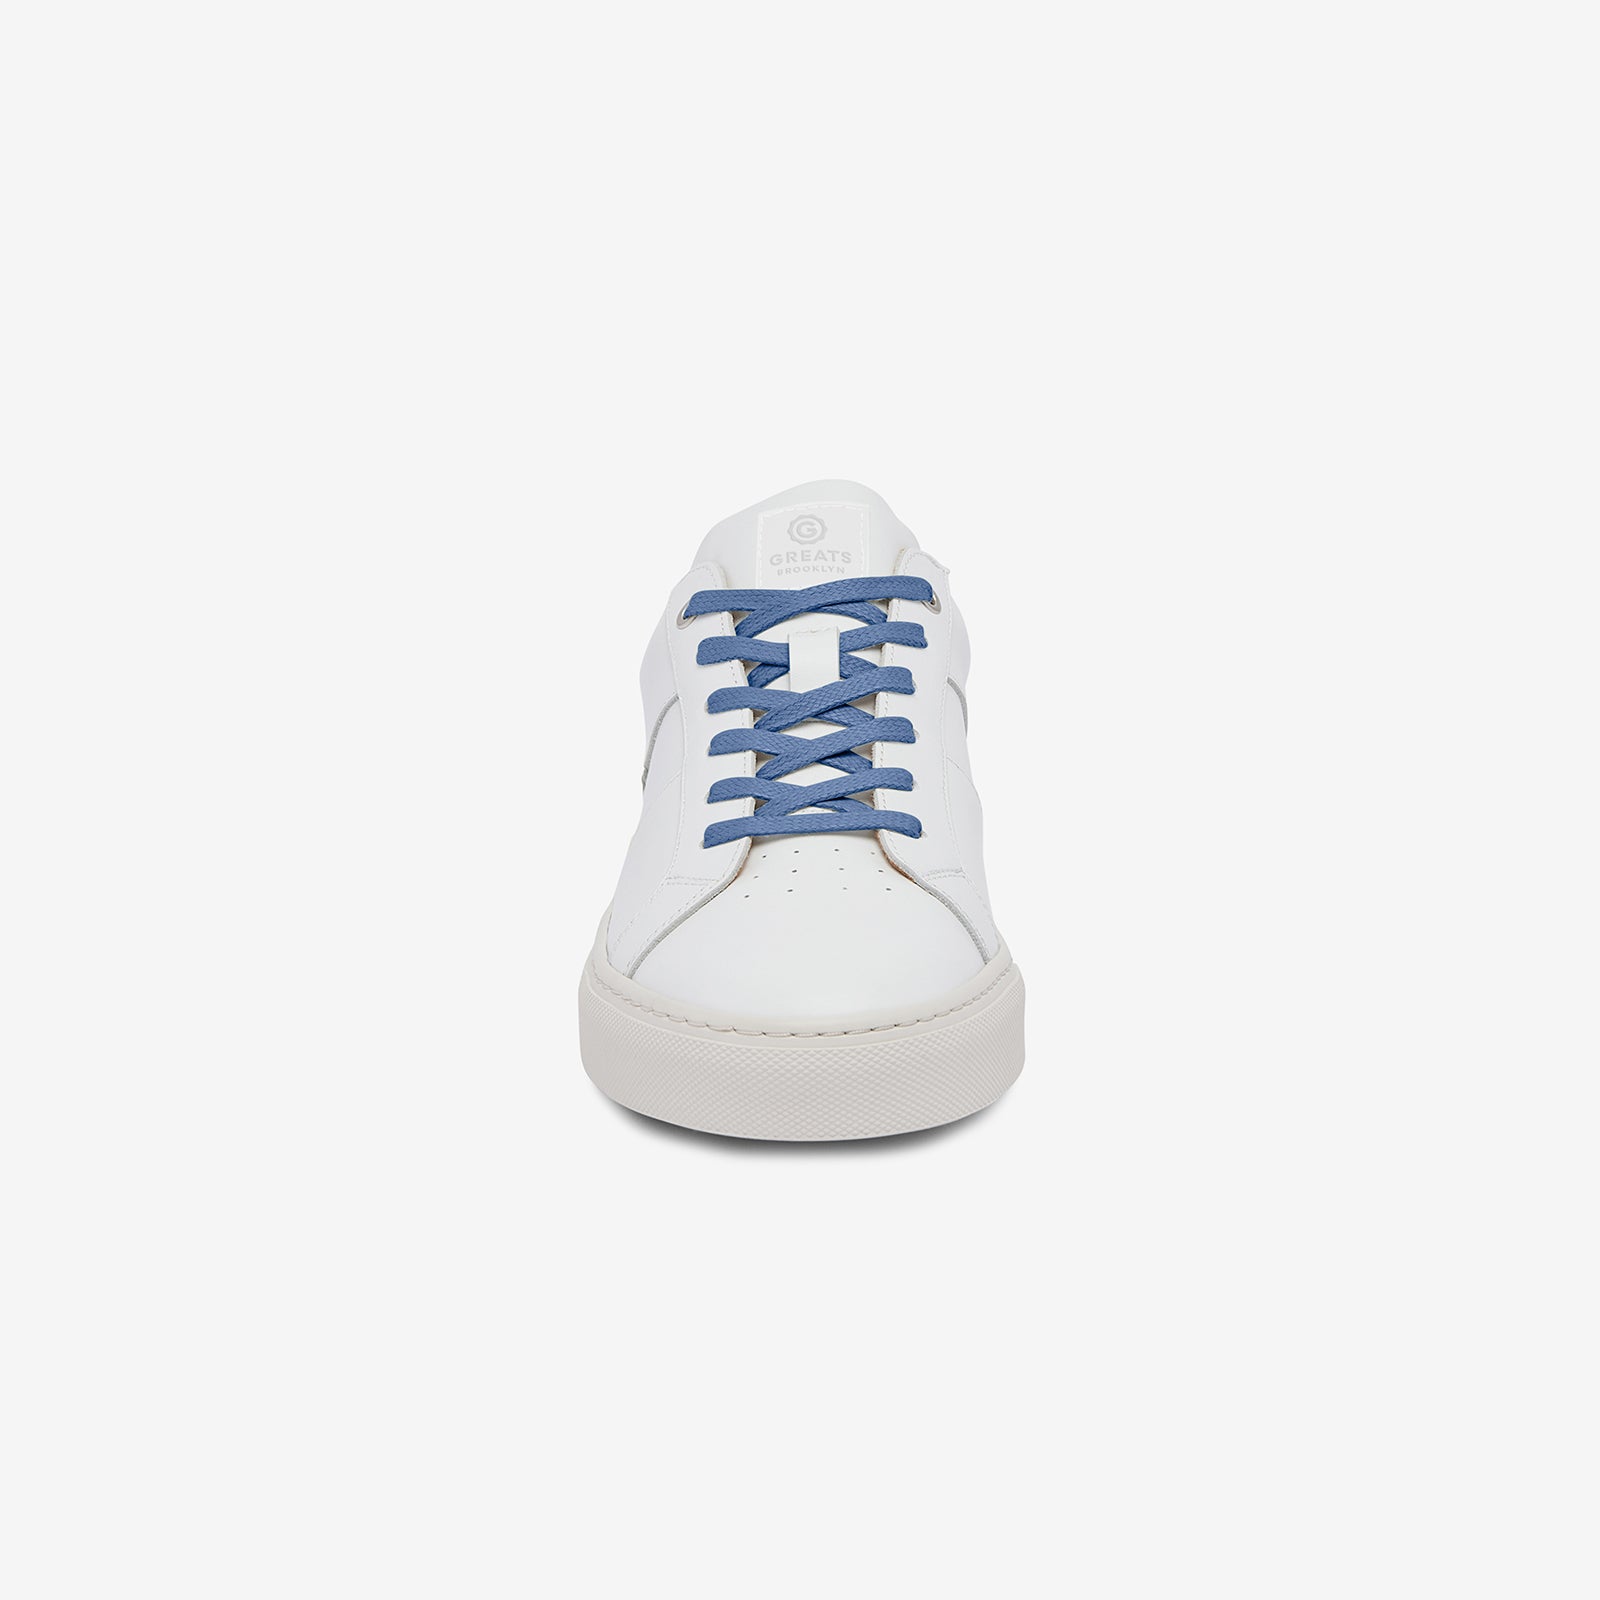 GREATS Premium Waxed Laces - Light Blue